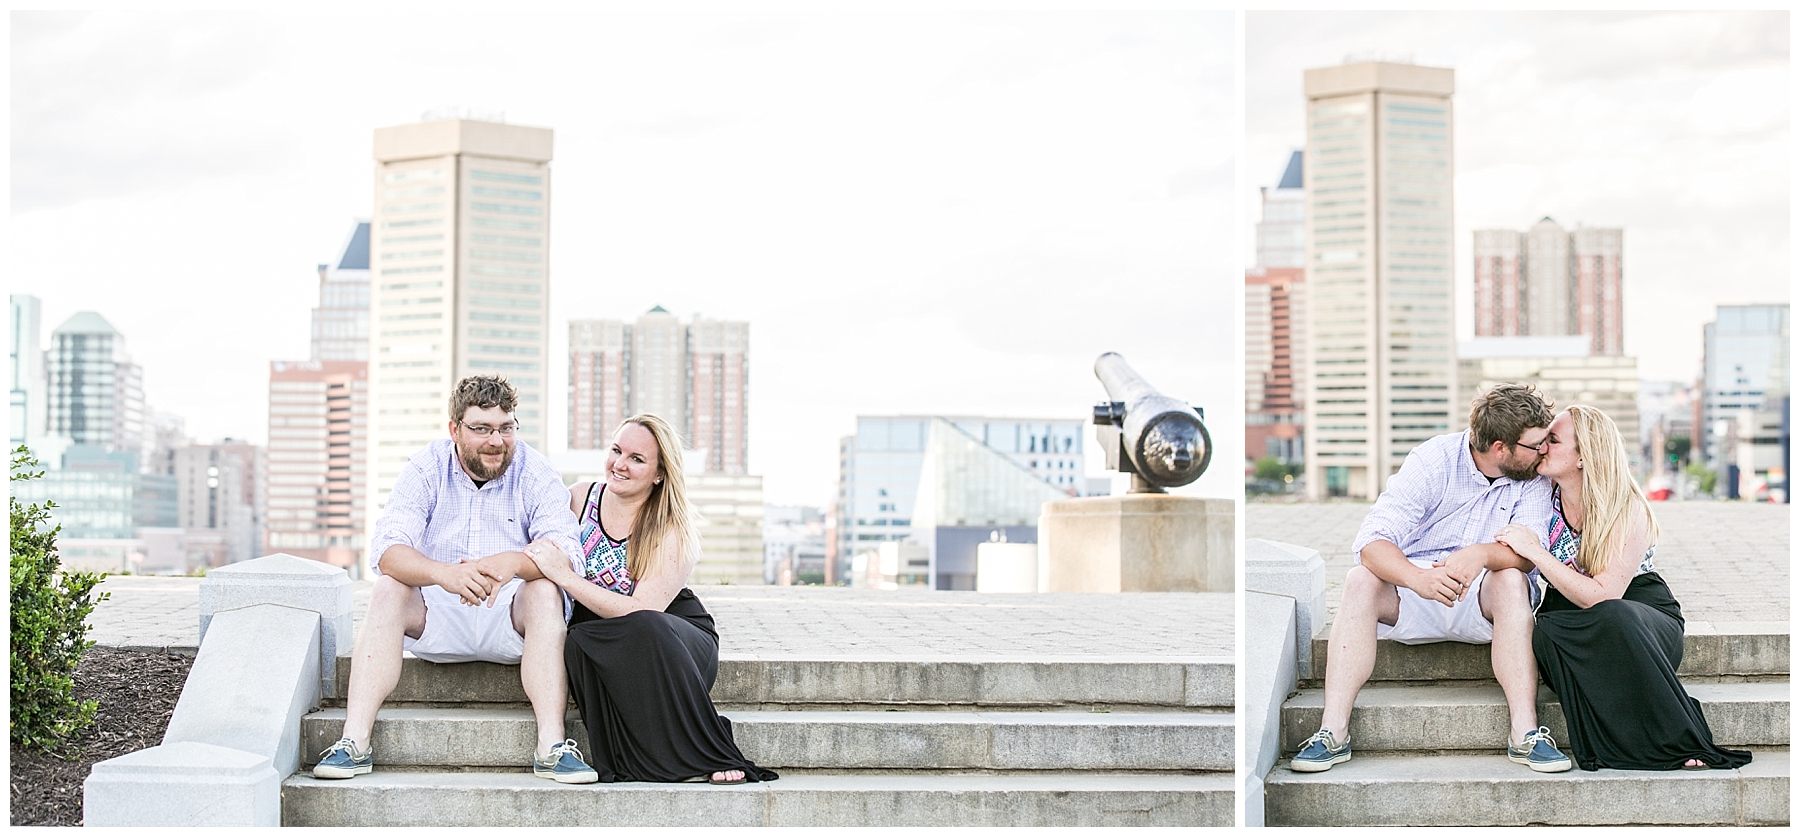 Tess Ray Camden Yards Engagement Session Living Radiant Photography photos_0043.jpg